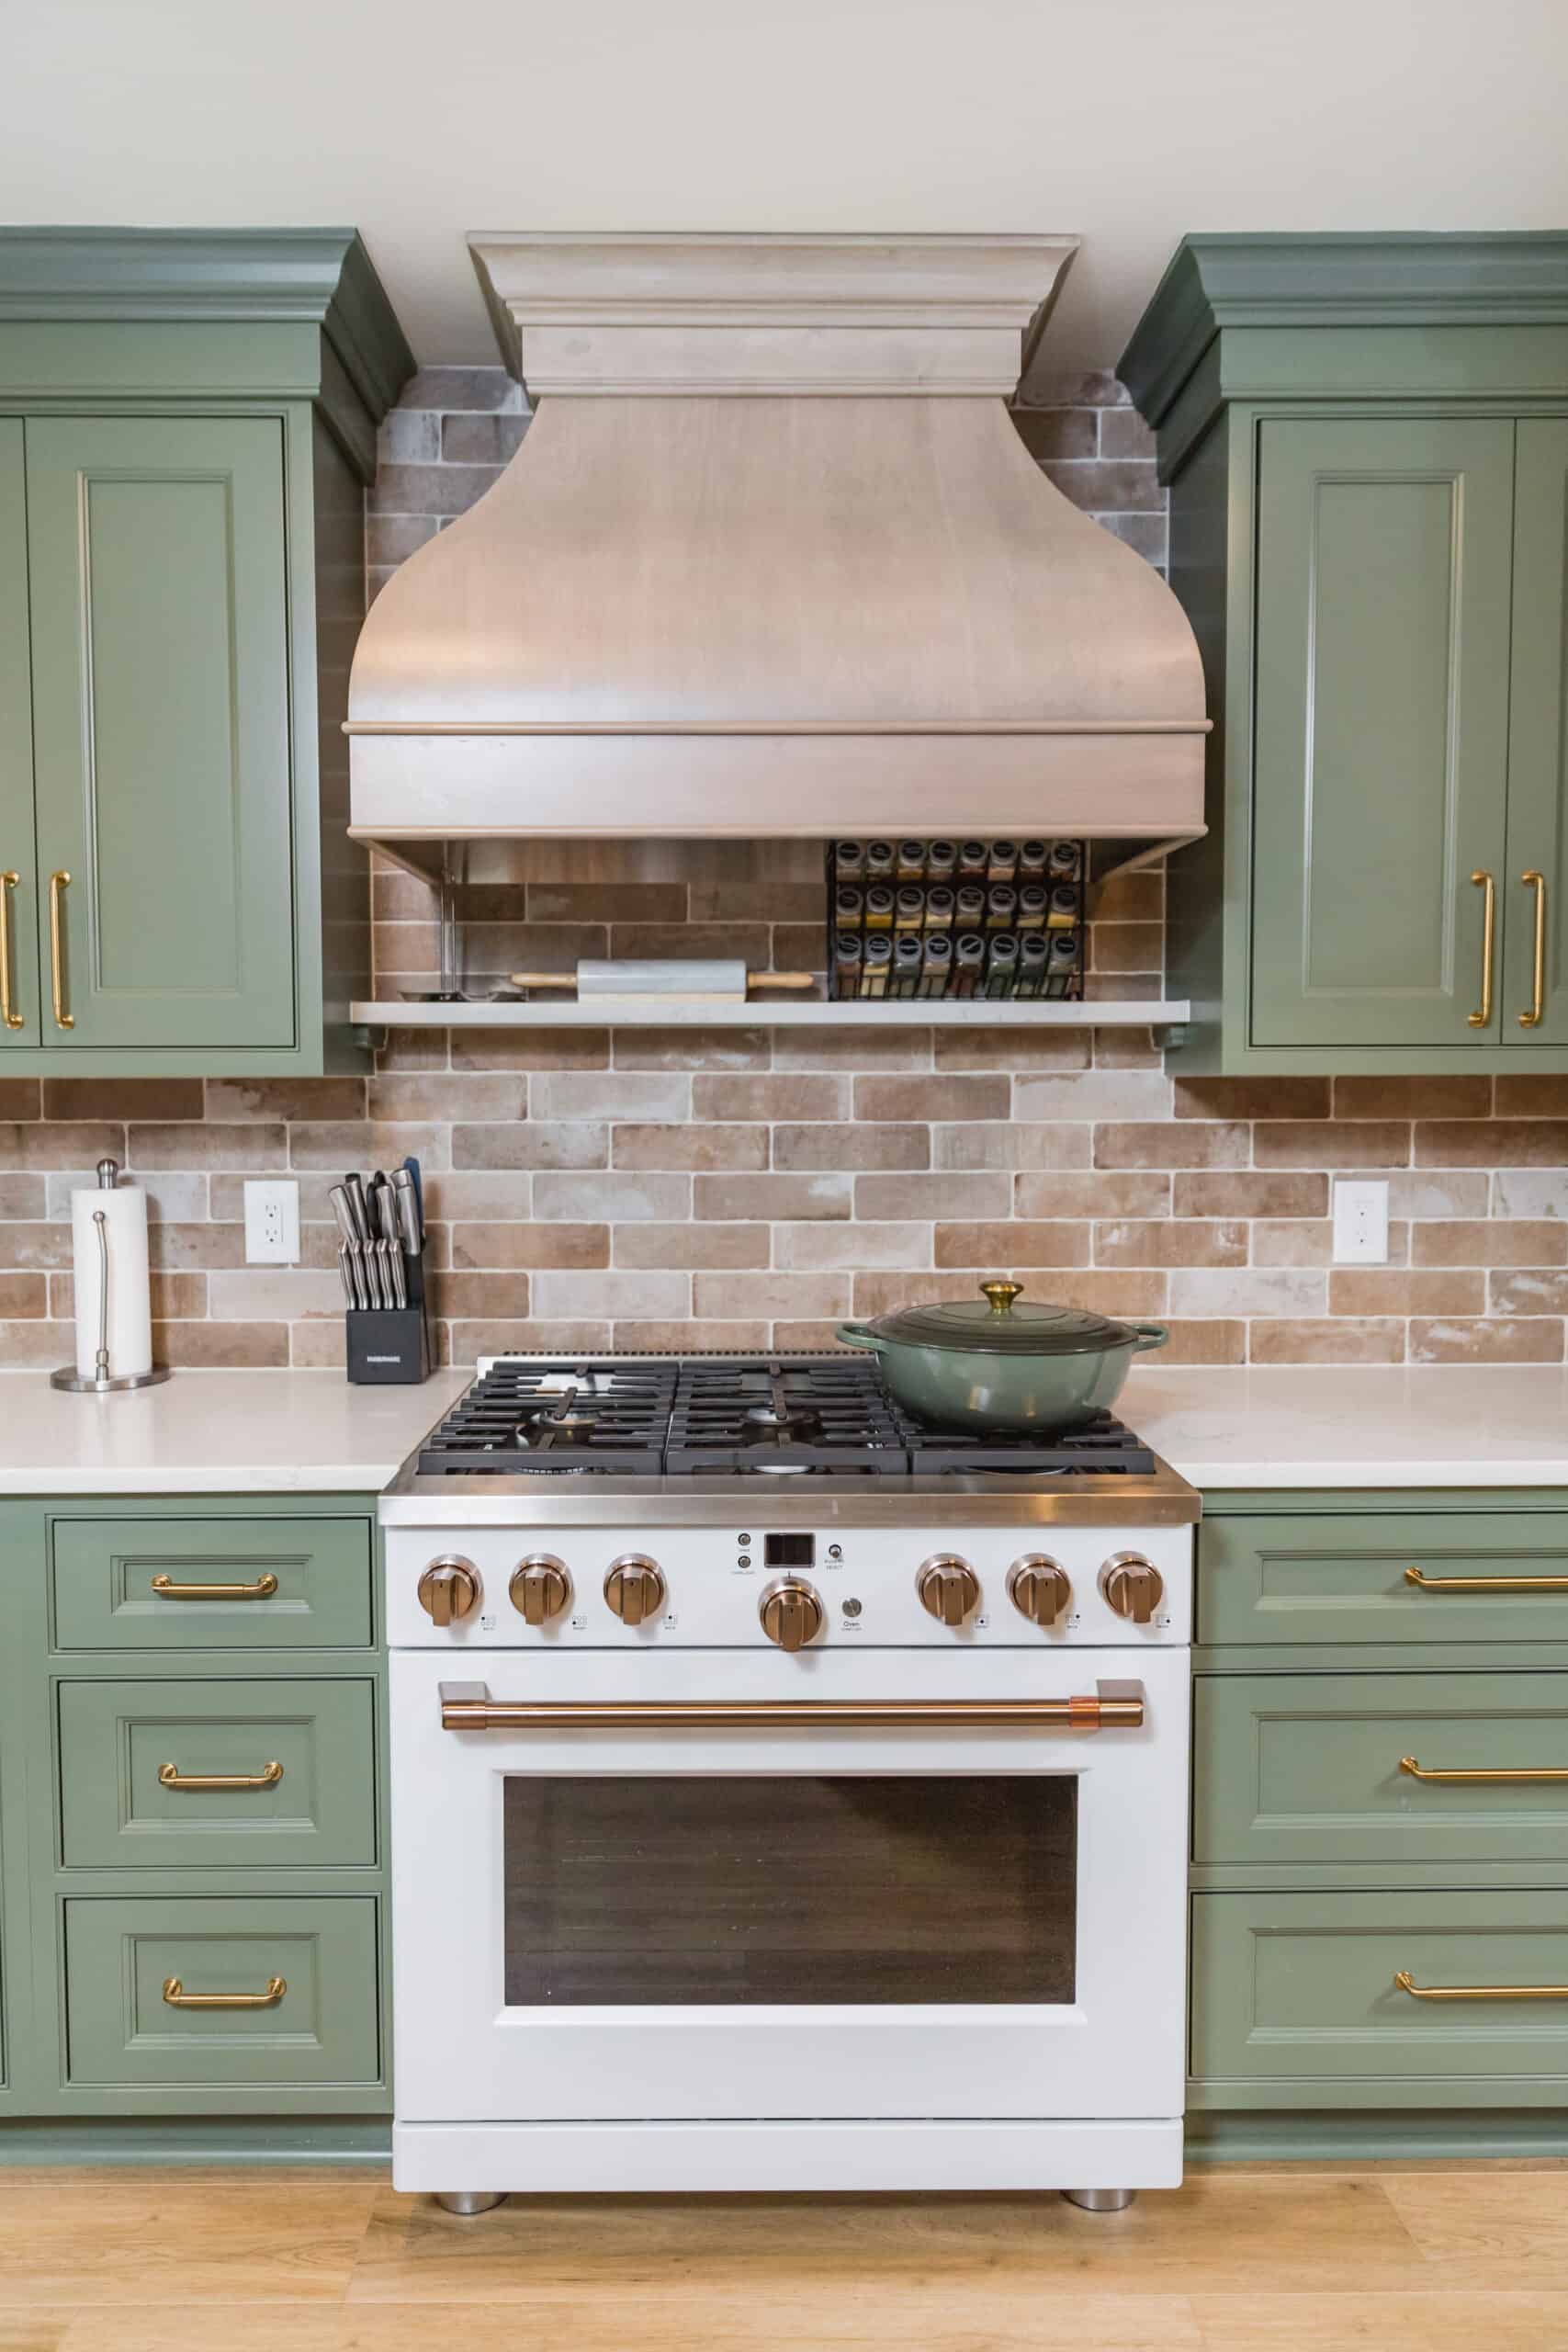 Nicholas Design Build | Modern kitchen with green cabinets, stainless steel appliances, and copper range hood.